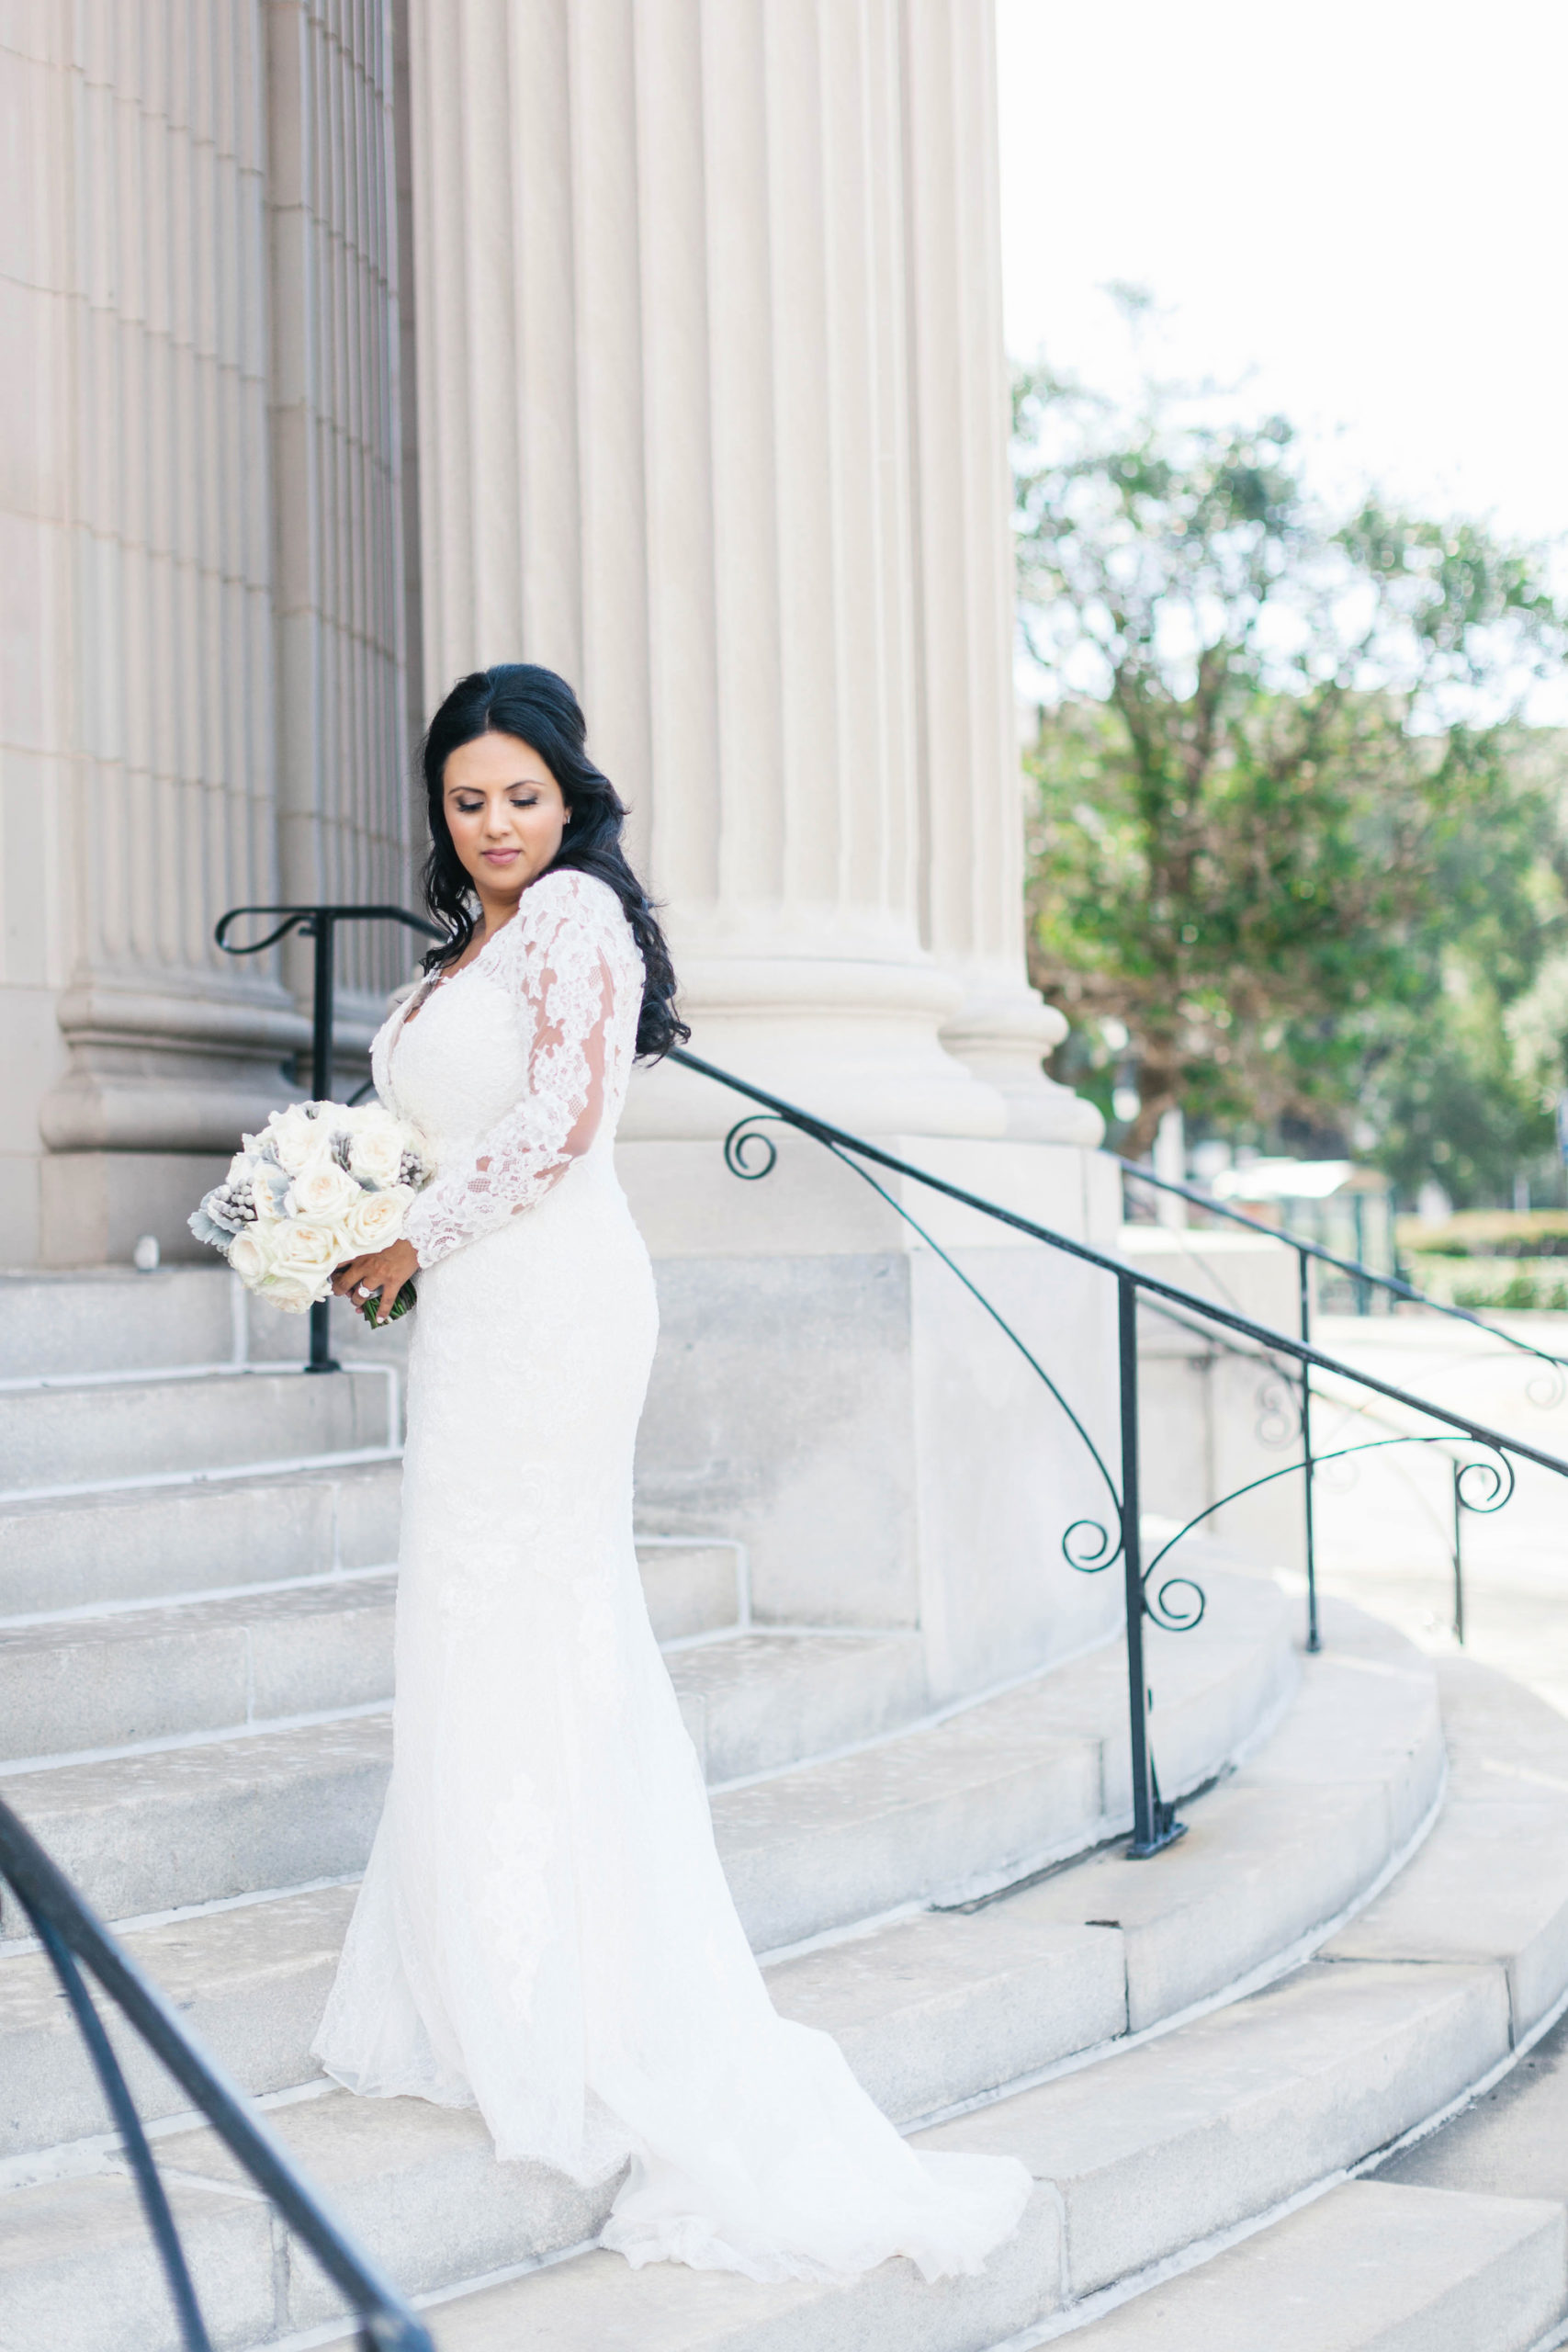 Romantic Bride Jessica from Parties A'la Carte Beauty Wedding Portrait in Lace and Illusion Long Sleeve Fitted Wedding Dress Holding White Roses Floral Bouquet on Steps of Historic Courthouse Boutique Tampa Hotel Wedding Venue Le Meridien